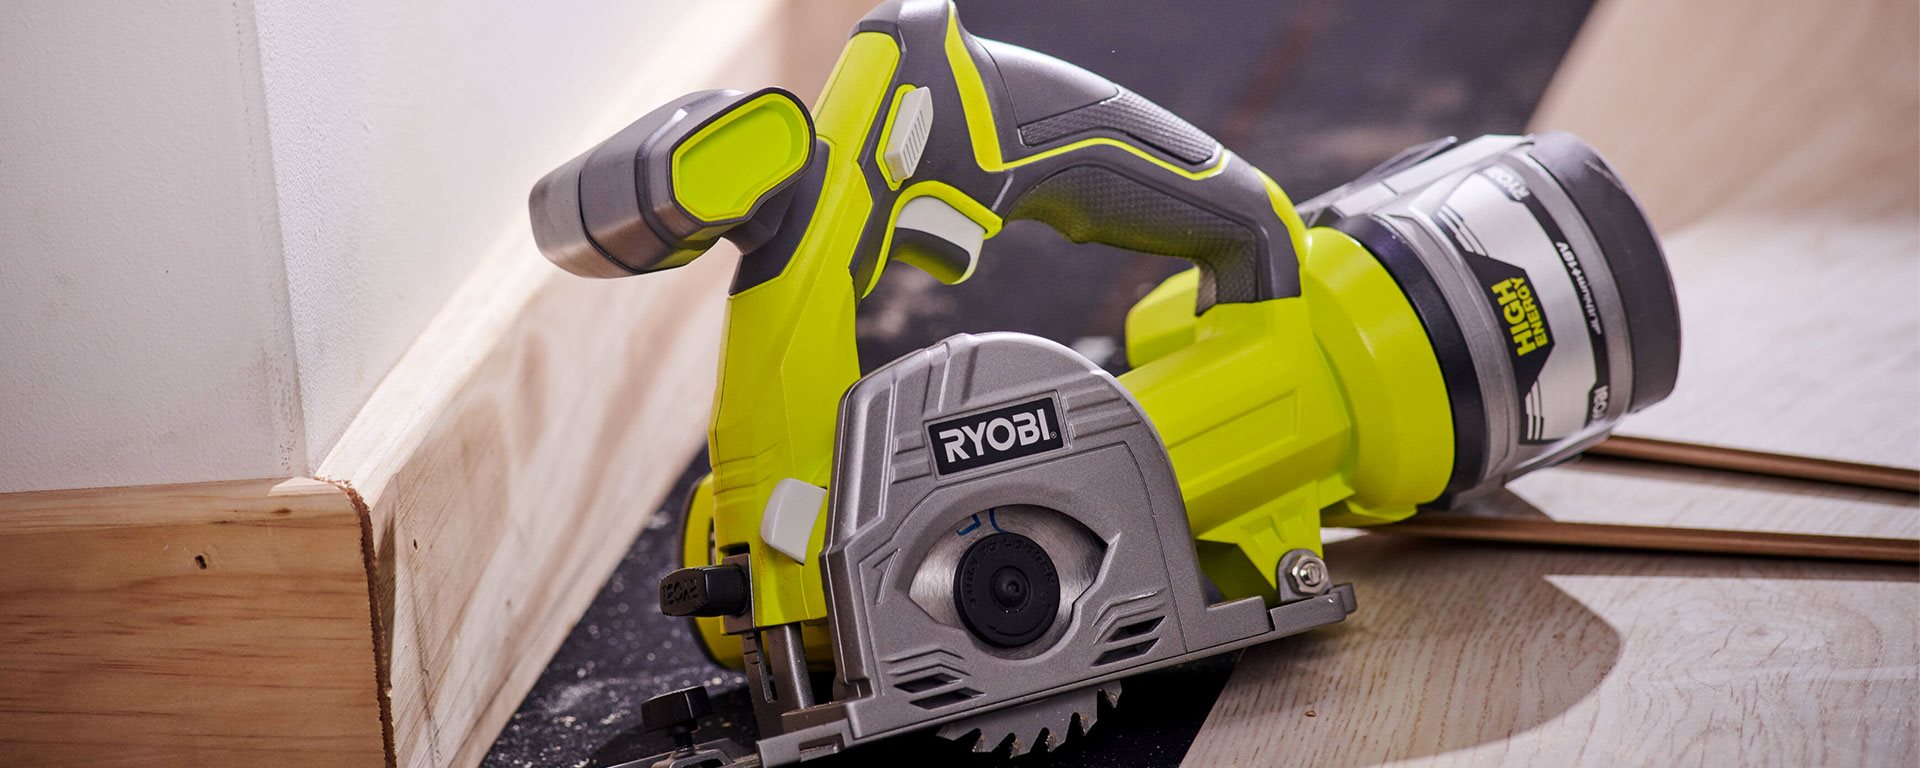 What is a circular saw good for?